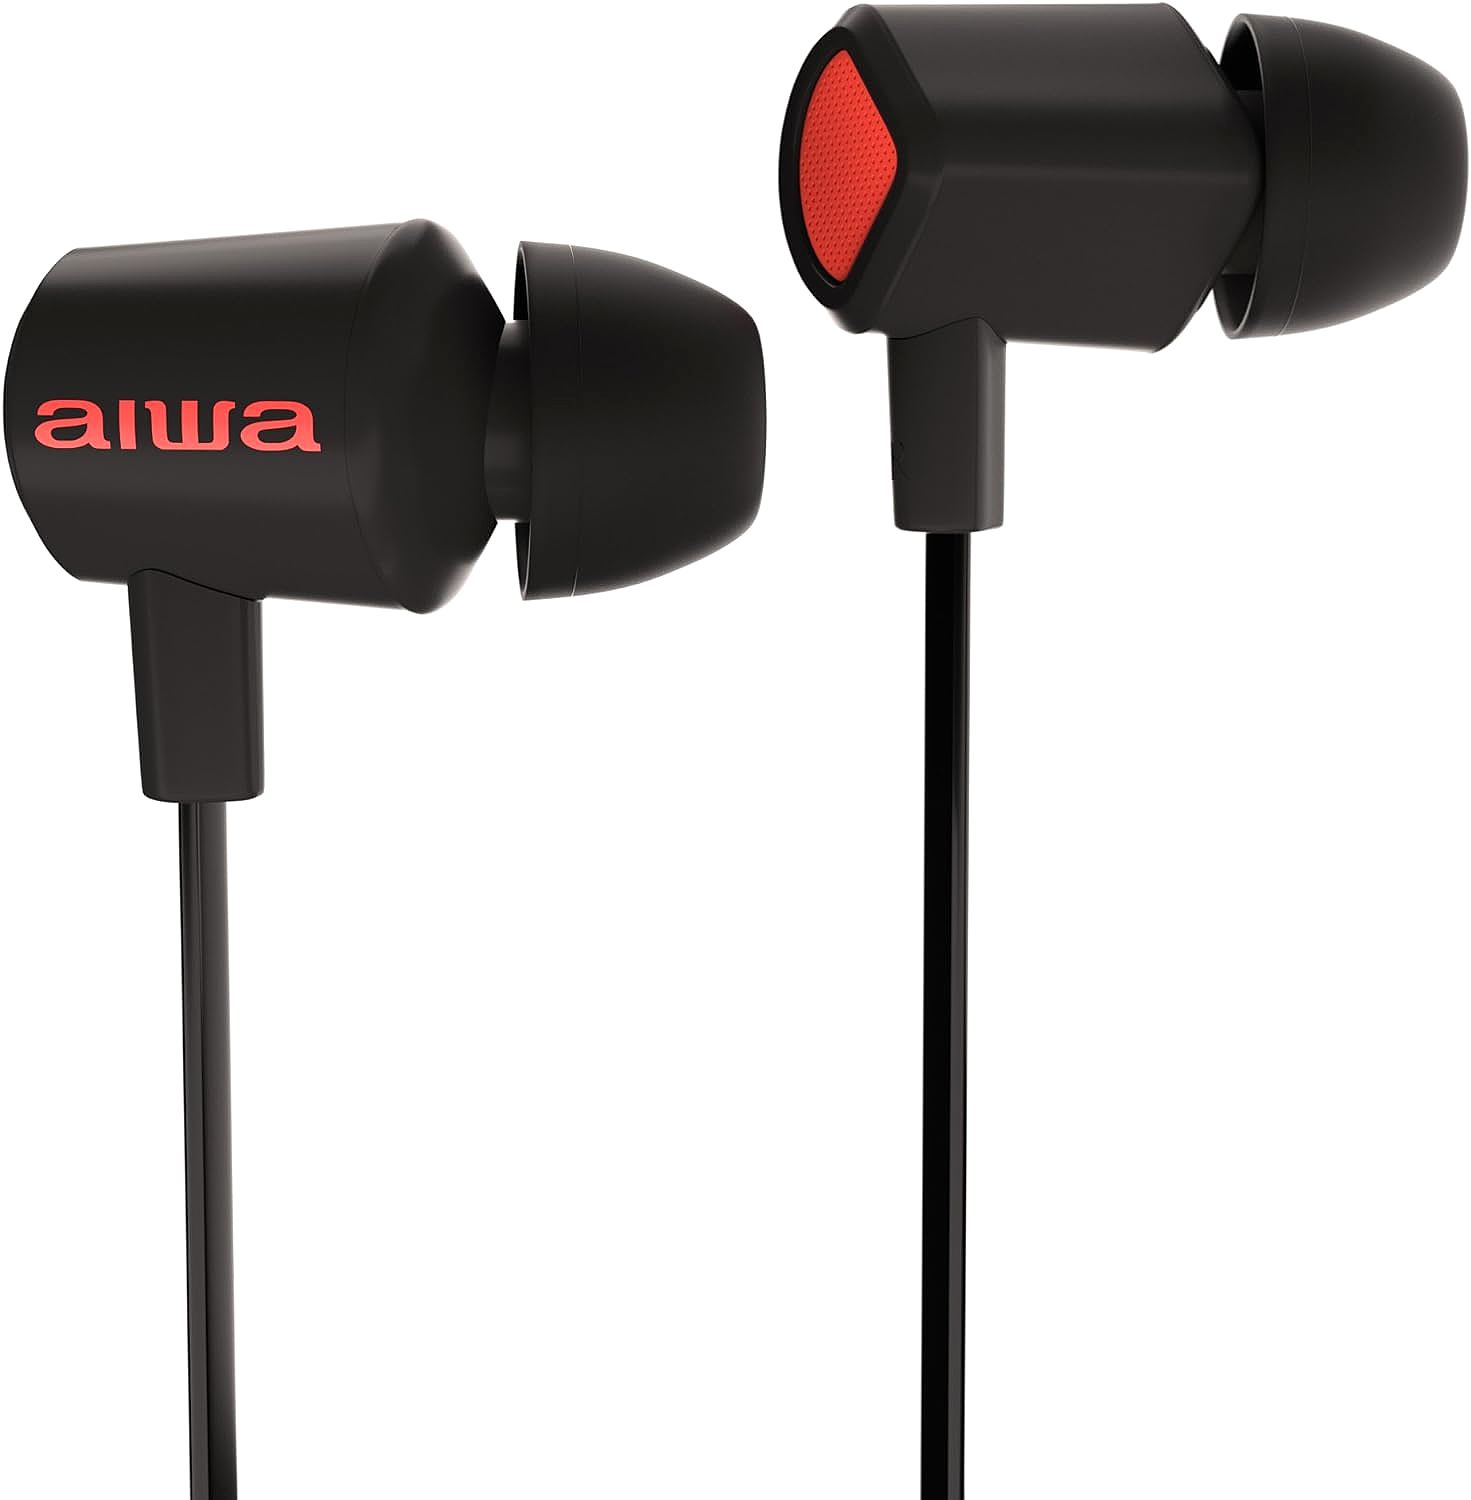 Aiwa Prodigy-1 High-Fidelity Earphones: Audiophile Sound Quality Without the Audiophile Price